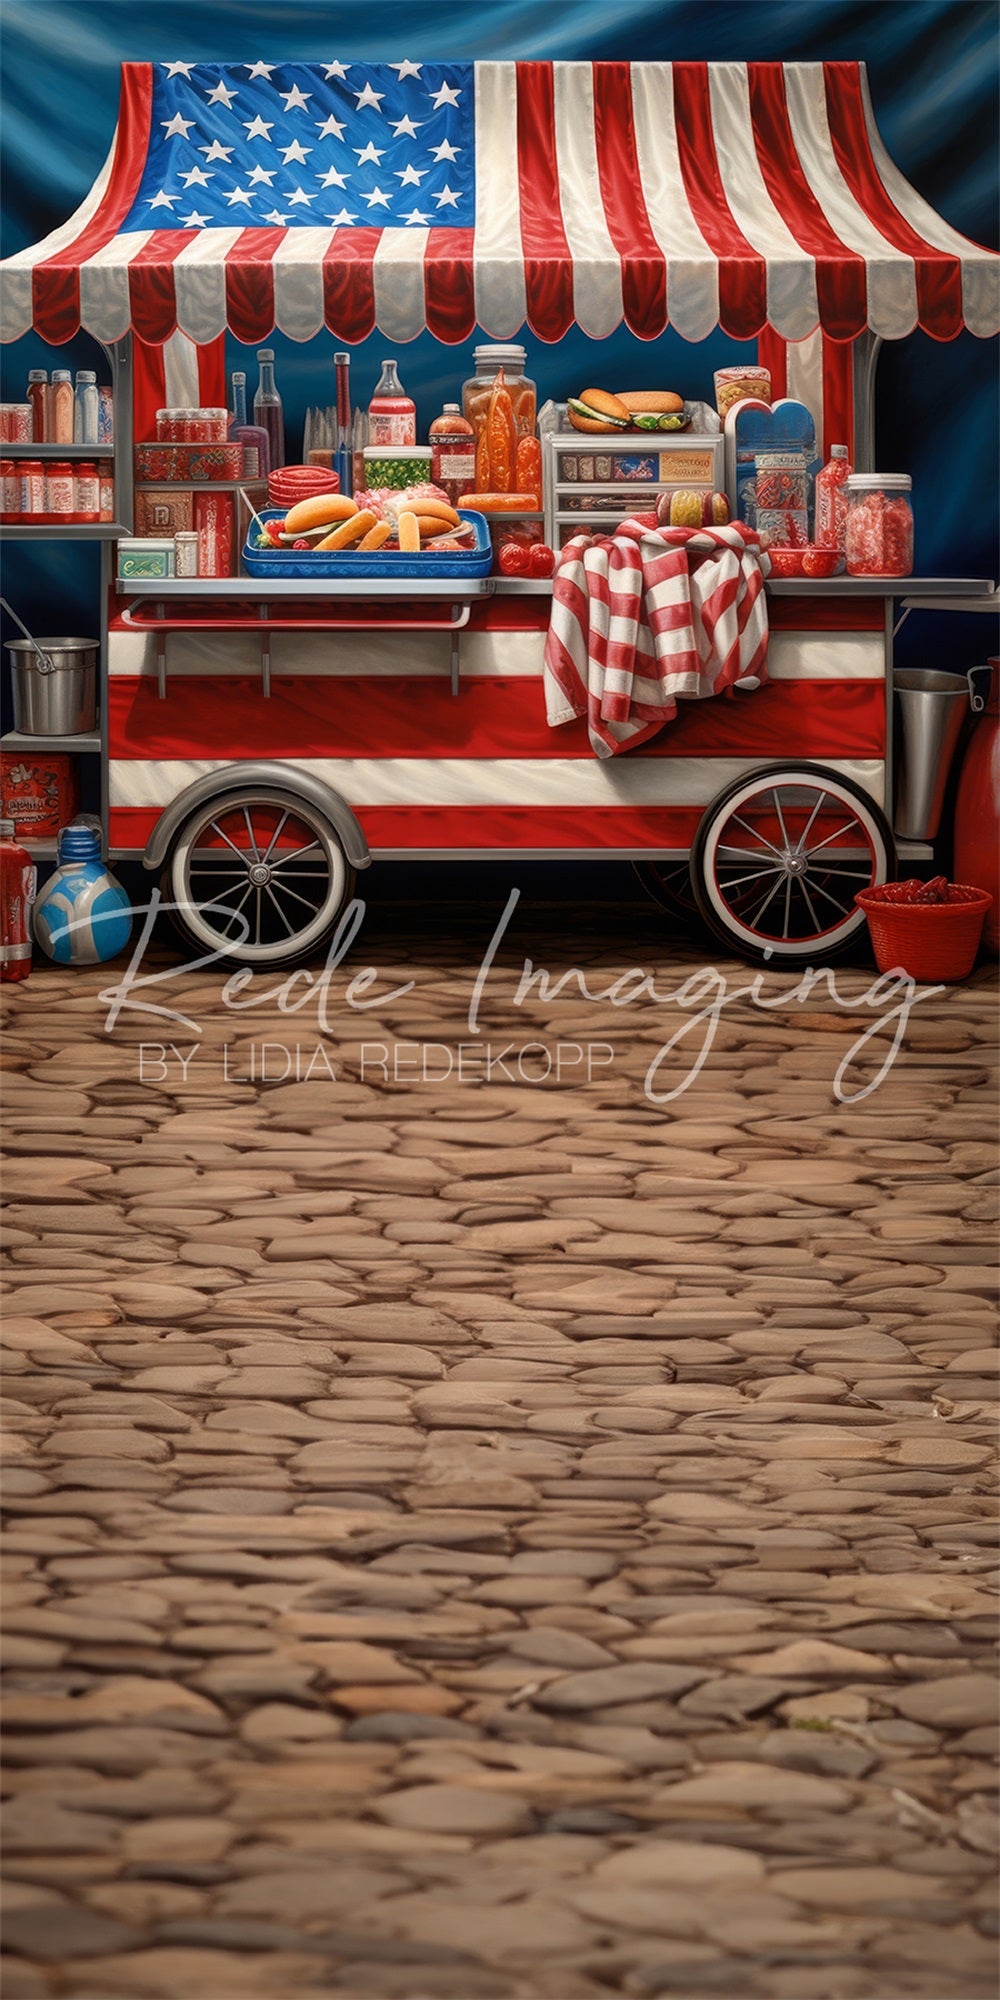 Kate Sweep Independence Day Red Plaid Cloth Iron Hot Dog Stand Backdrop Designed by Lidia Redekopp